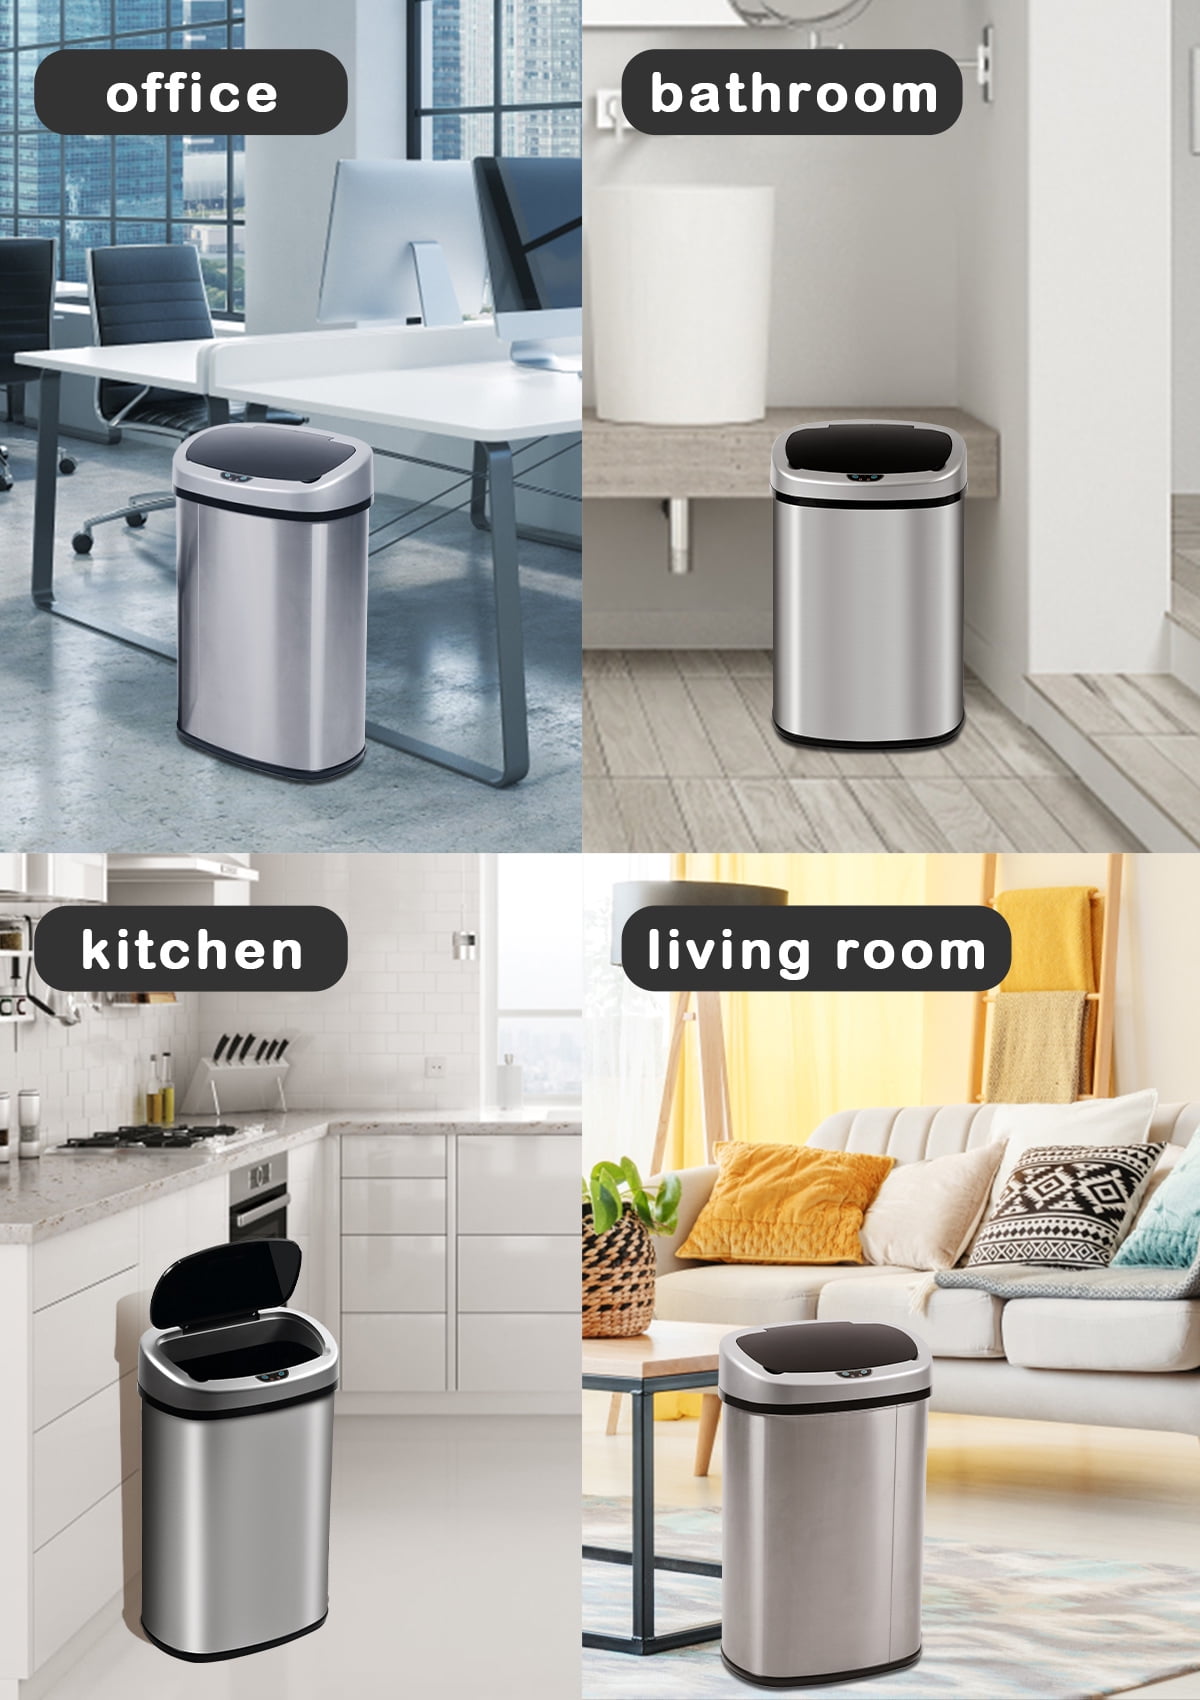 Stainless Steel 13 Gallon Touchless Kitchen Trash Can - Bed Bath